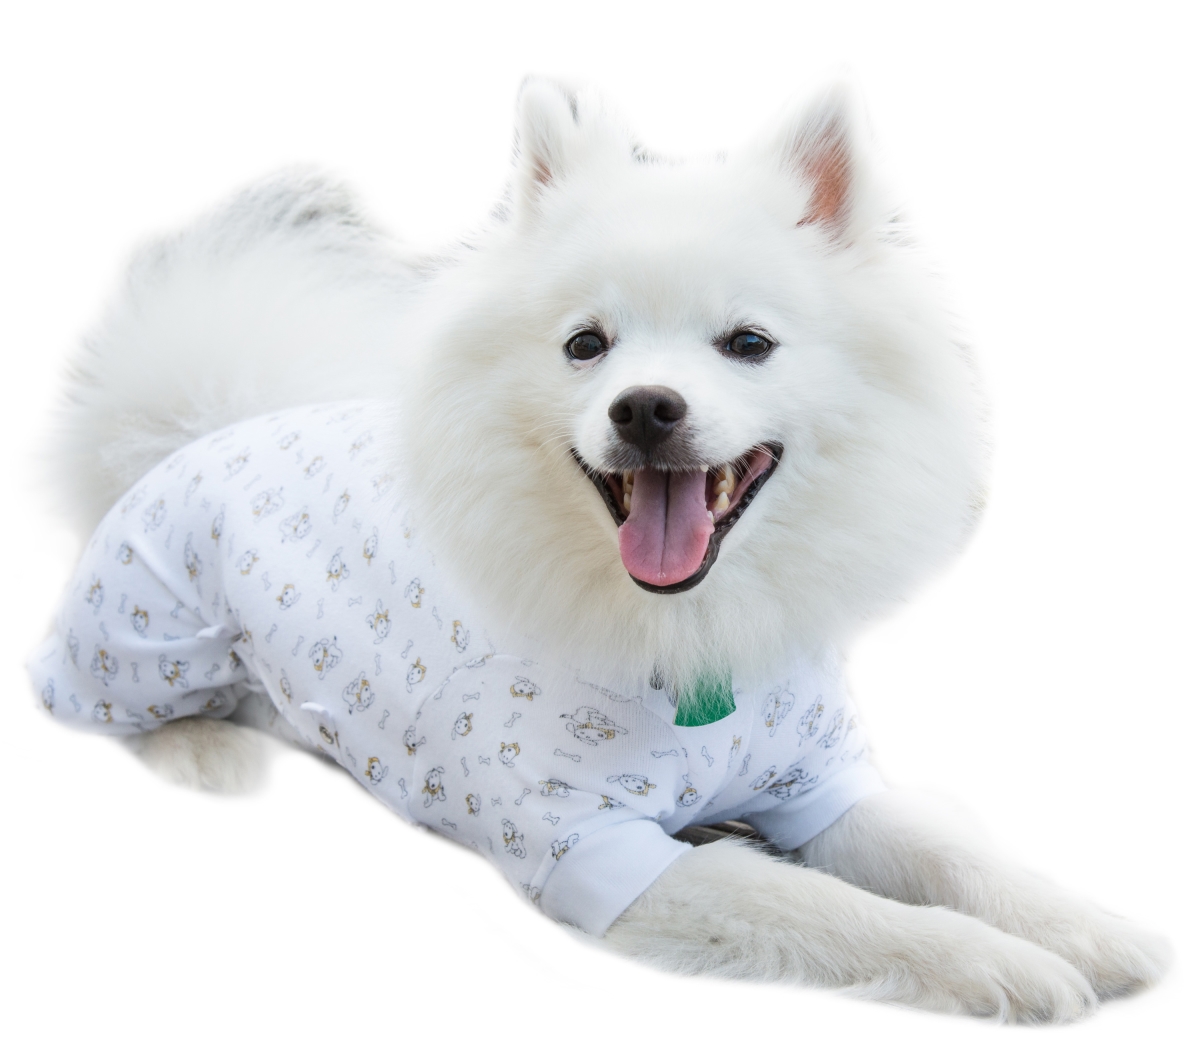 Xxl Adj Fit Pullover Ss Puppy P Adjustable Fit Puppy Print Pullover With Short Sleeve For Pets - 2xl